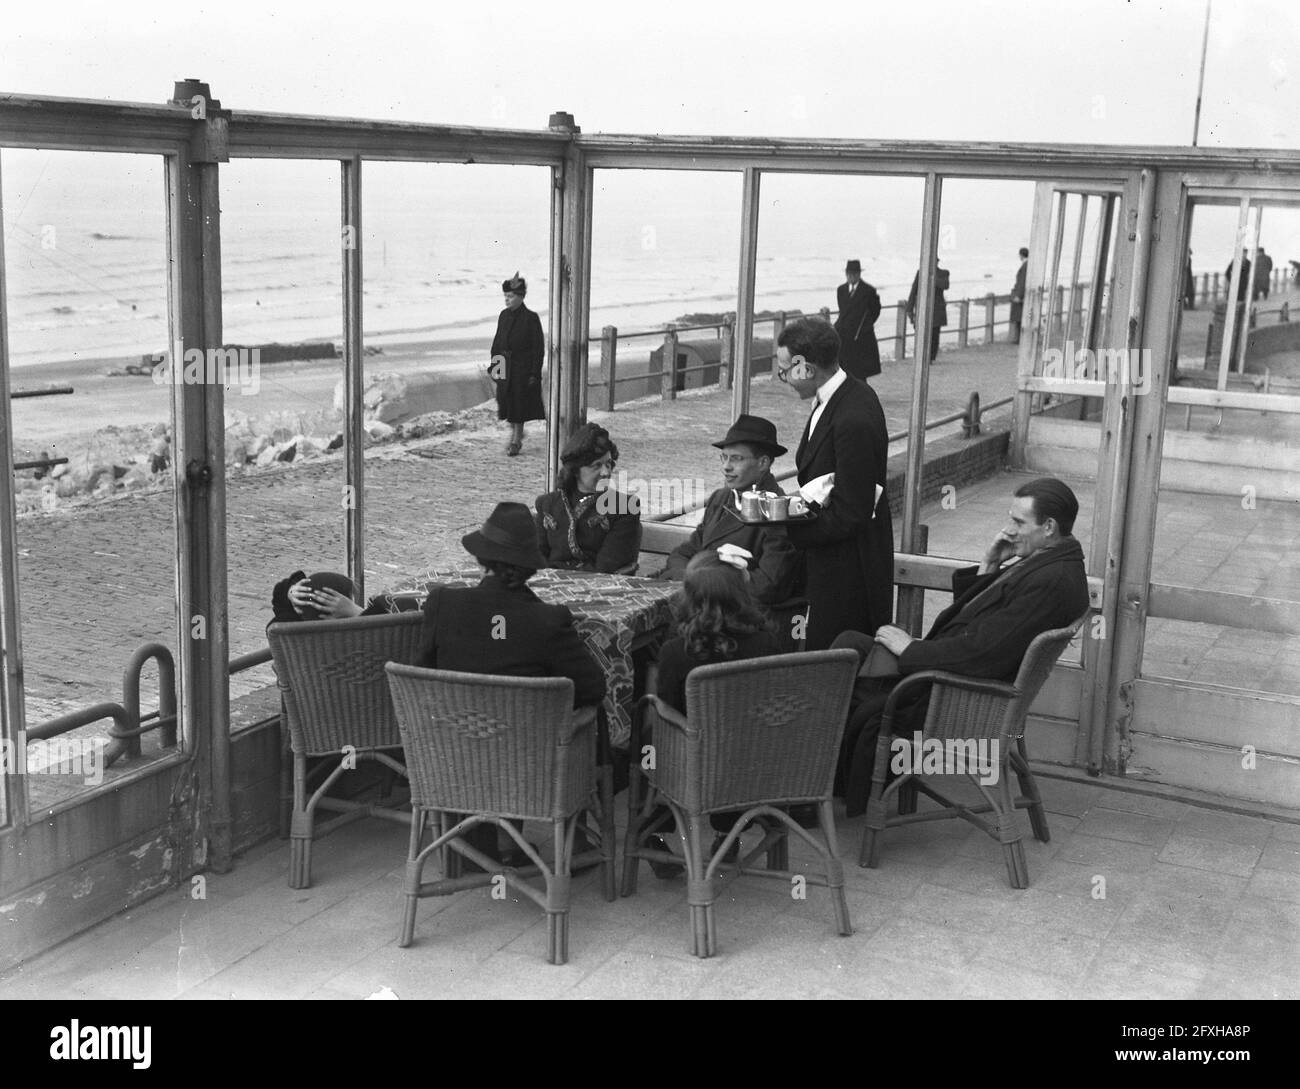 Spring weather in Scheveningen, March 20, 1946, spring weather, The Netherlands, 20th century press agency photo, news to remember, documentary, historic photography 1945-1990, visual stories, human history of the Twentieth Century, capturing moments in time Stock Photo